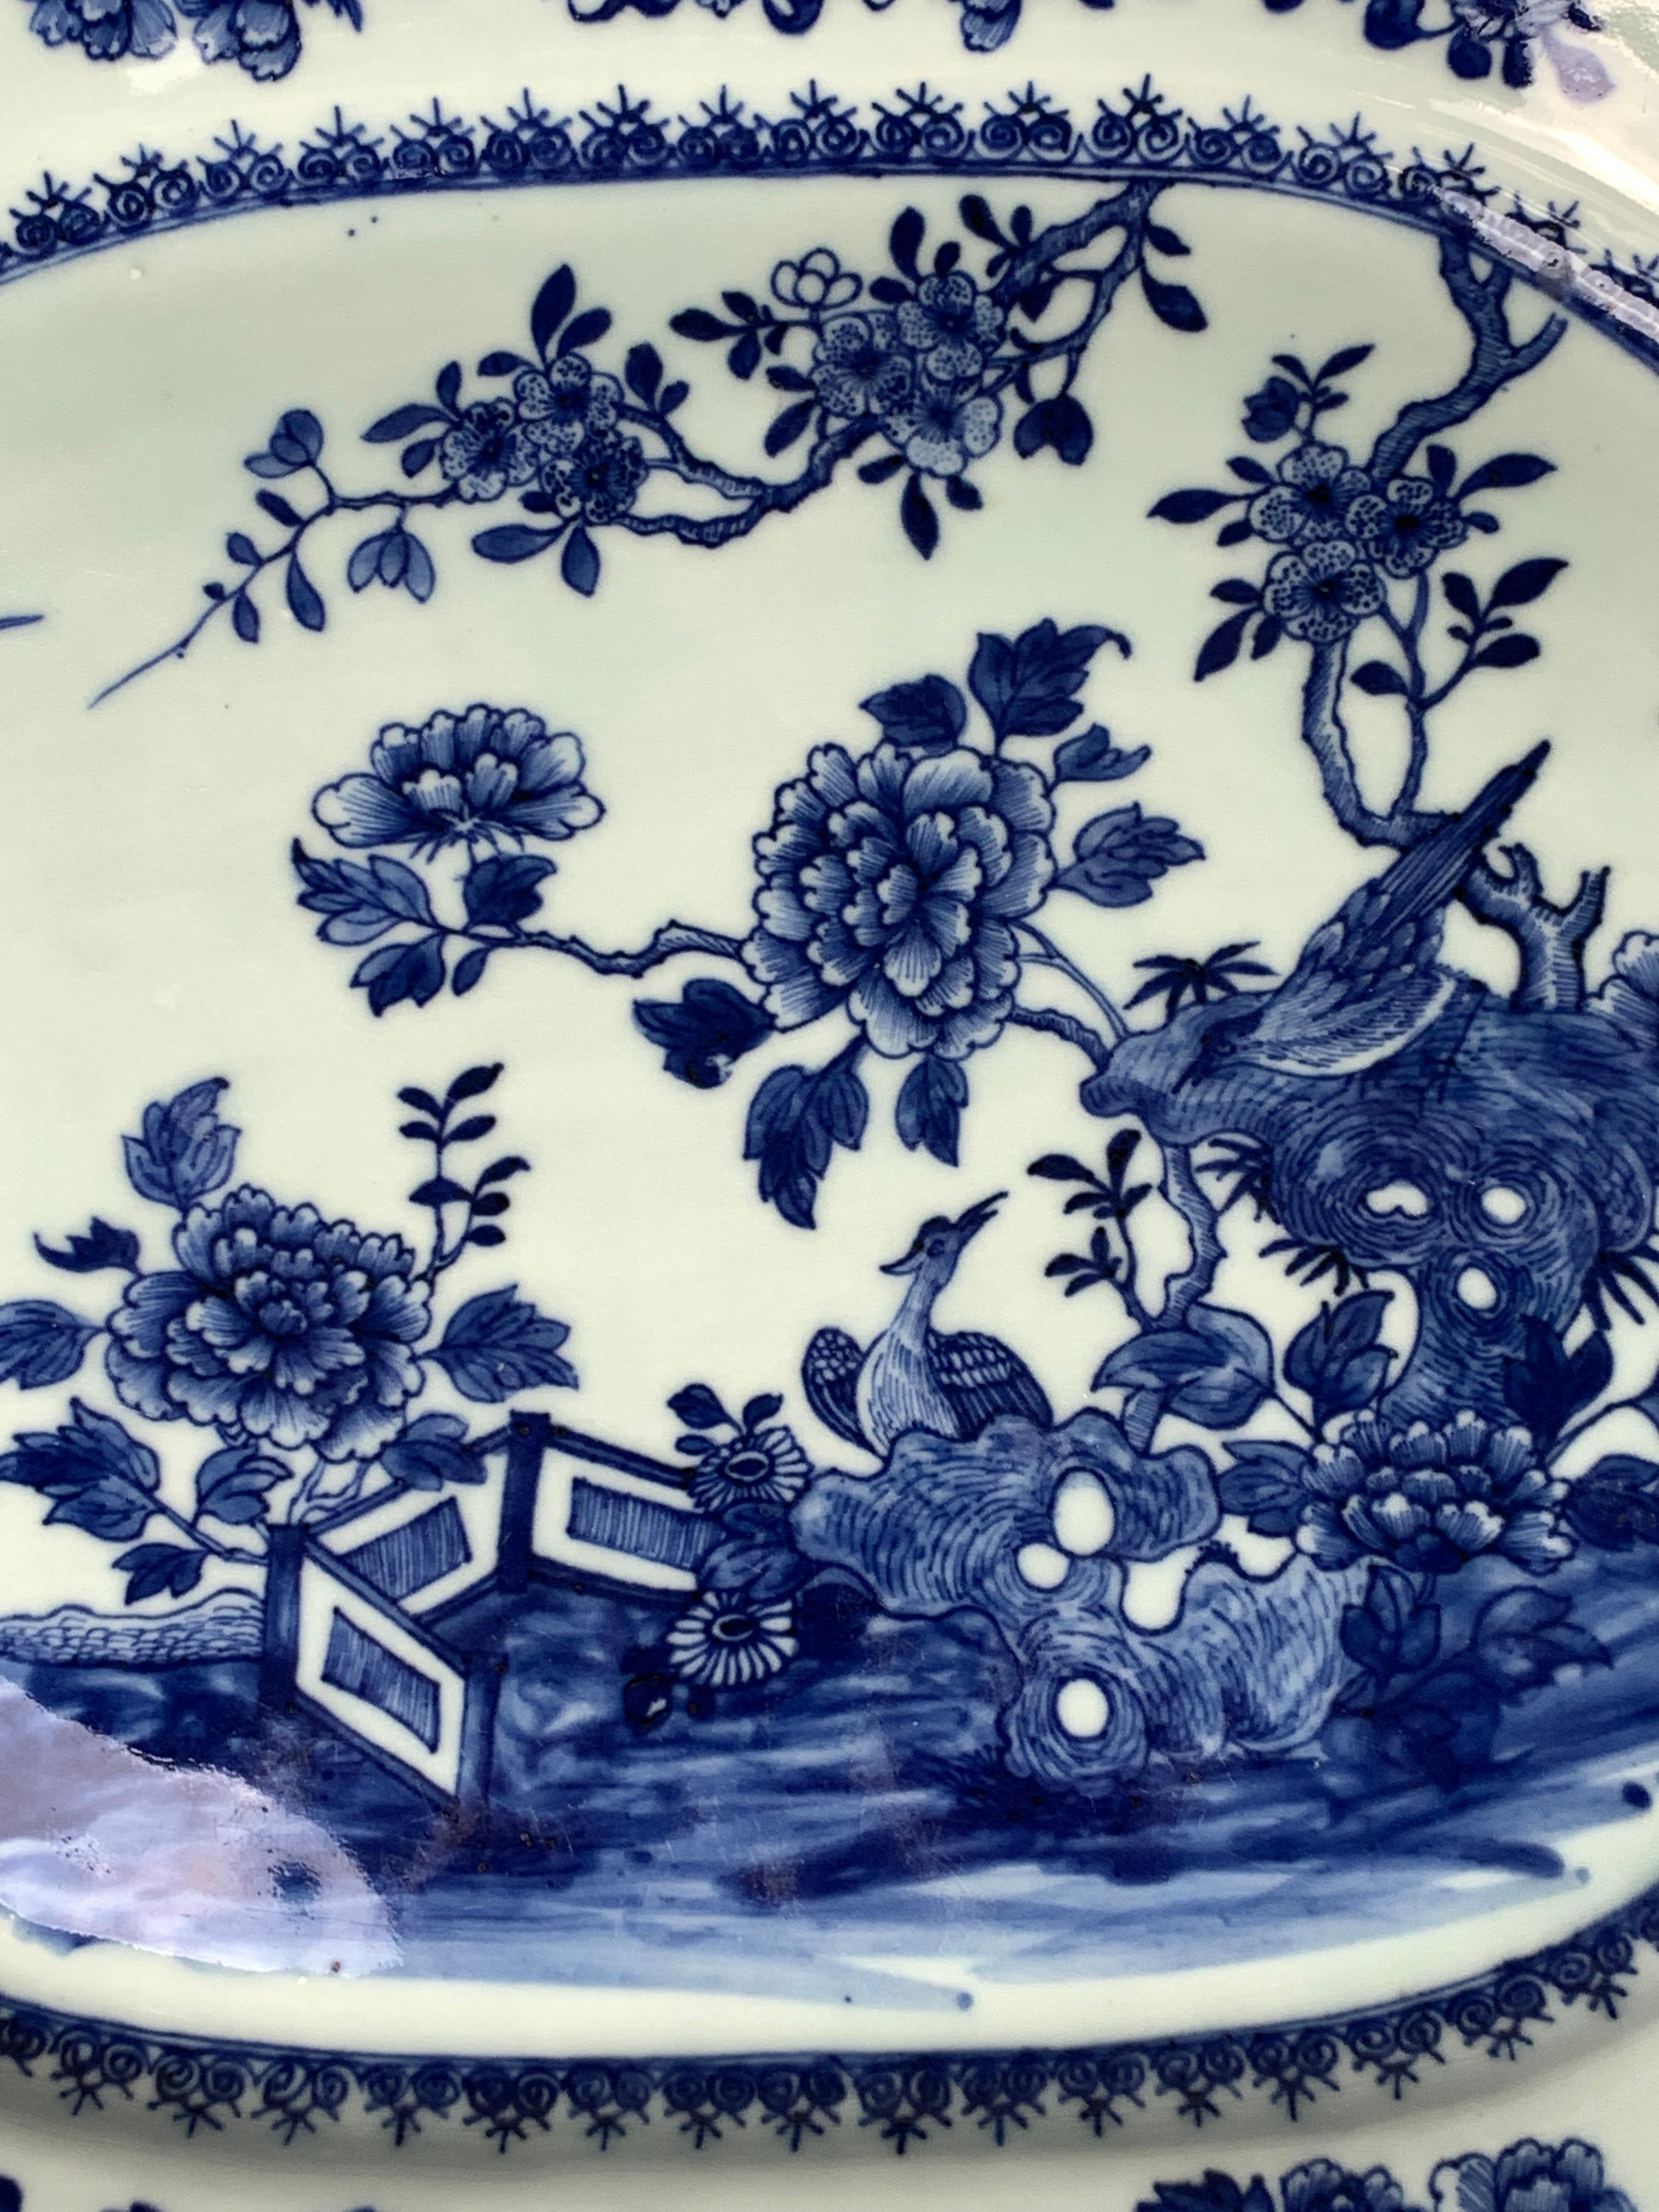 A Chinese blue and white porcelain platter hand-painted in the Qianlong dynasty in the 18th century. We see a beautiful garden scene painted in deep cobalt blue with large peonies emanating from rockwork, a pair of songbirds, and a second pair of